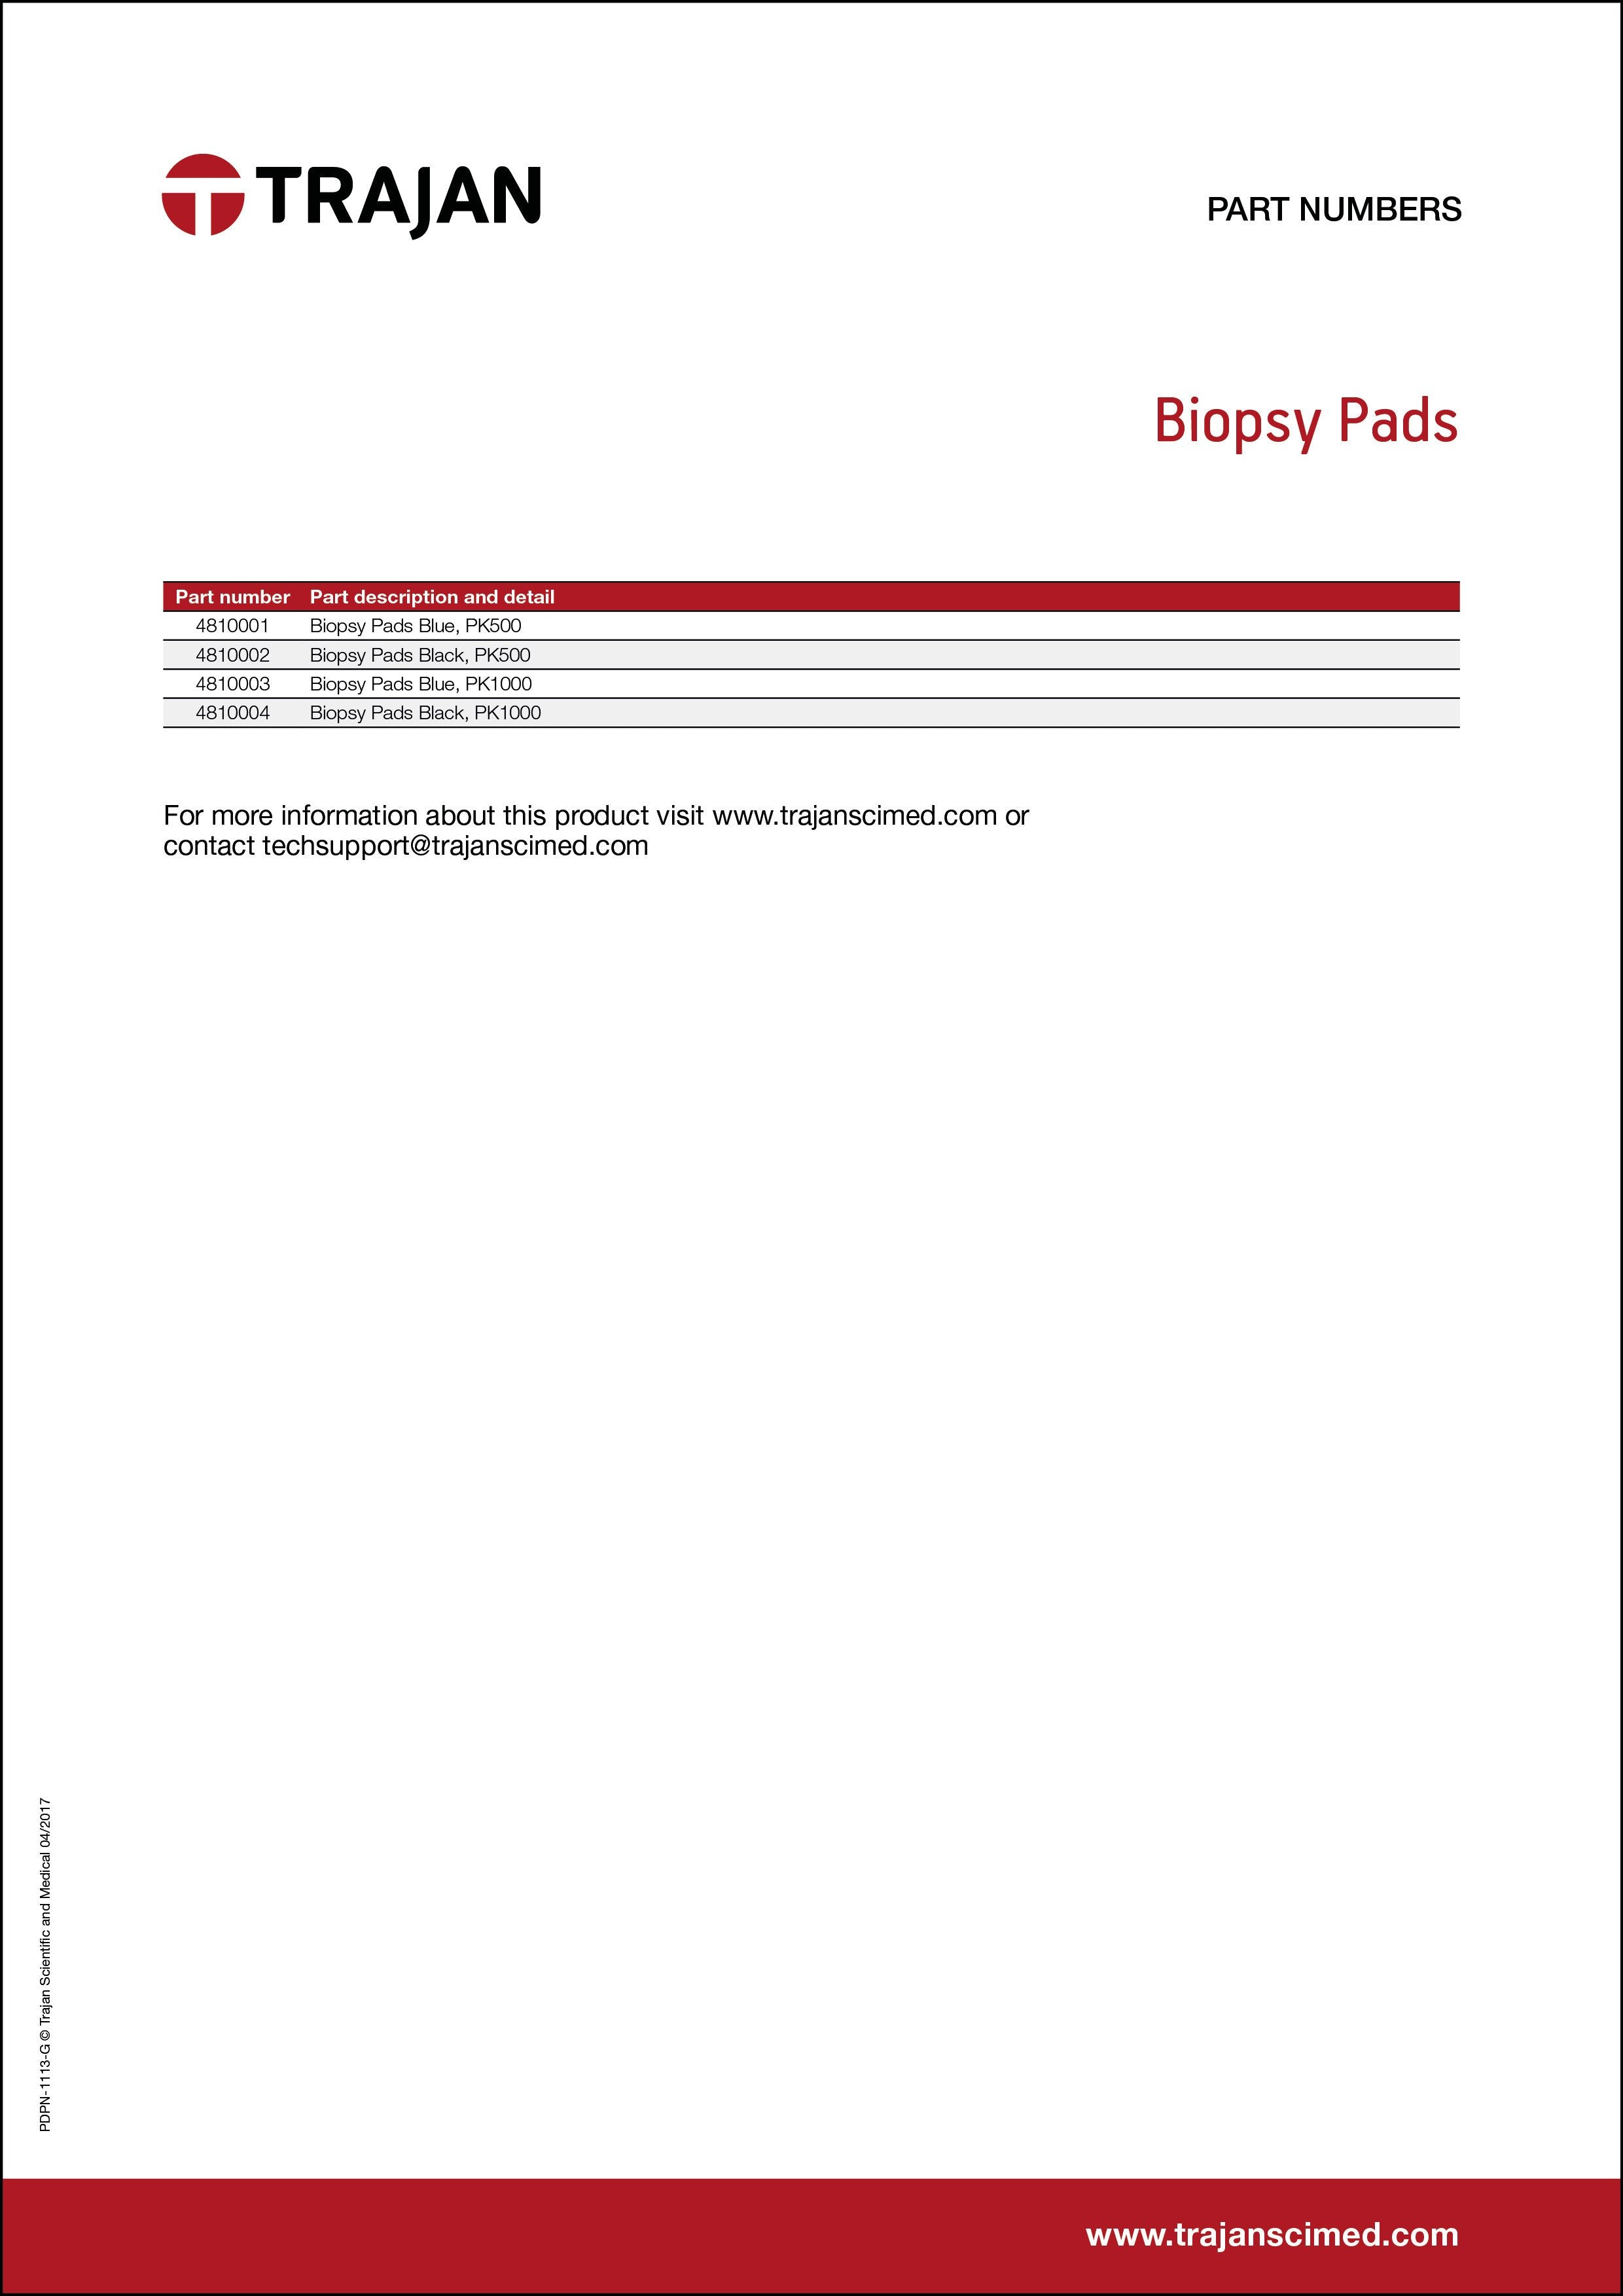 Part Number List - Biopsy Pads cover